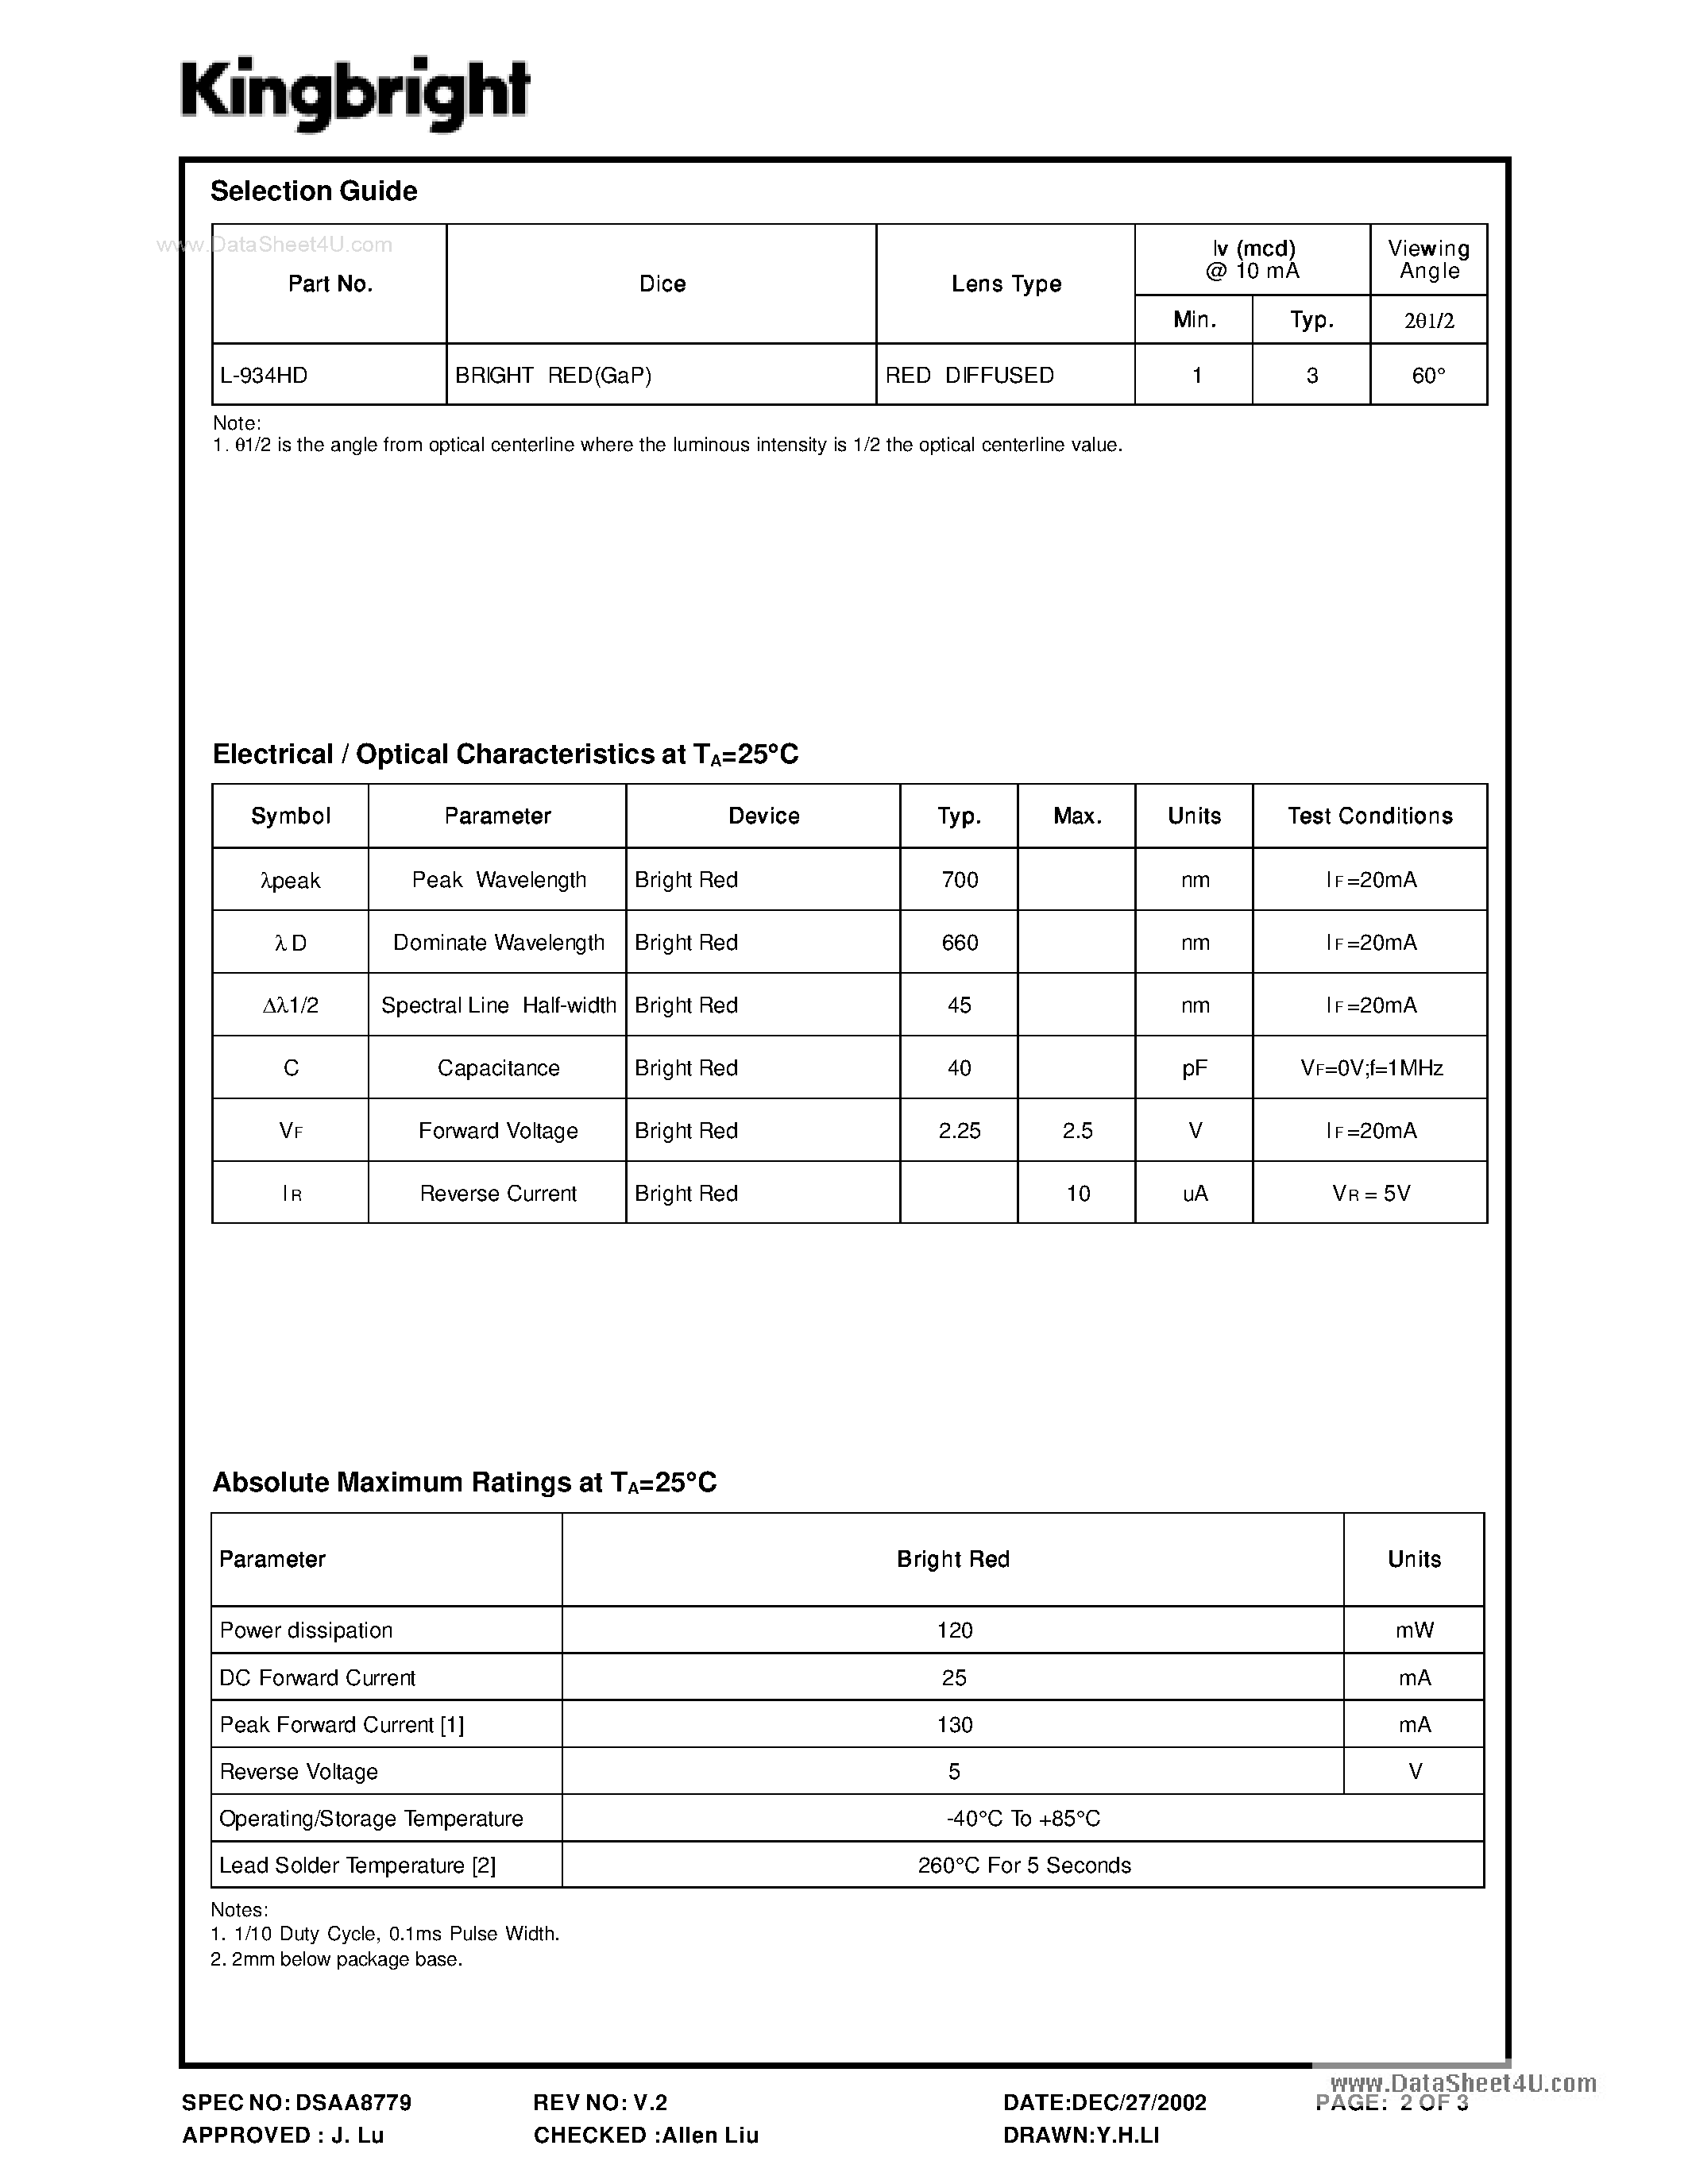 Datasheet L-934HD - Bright RED page 2